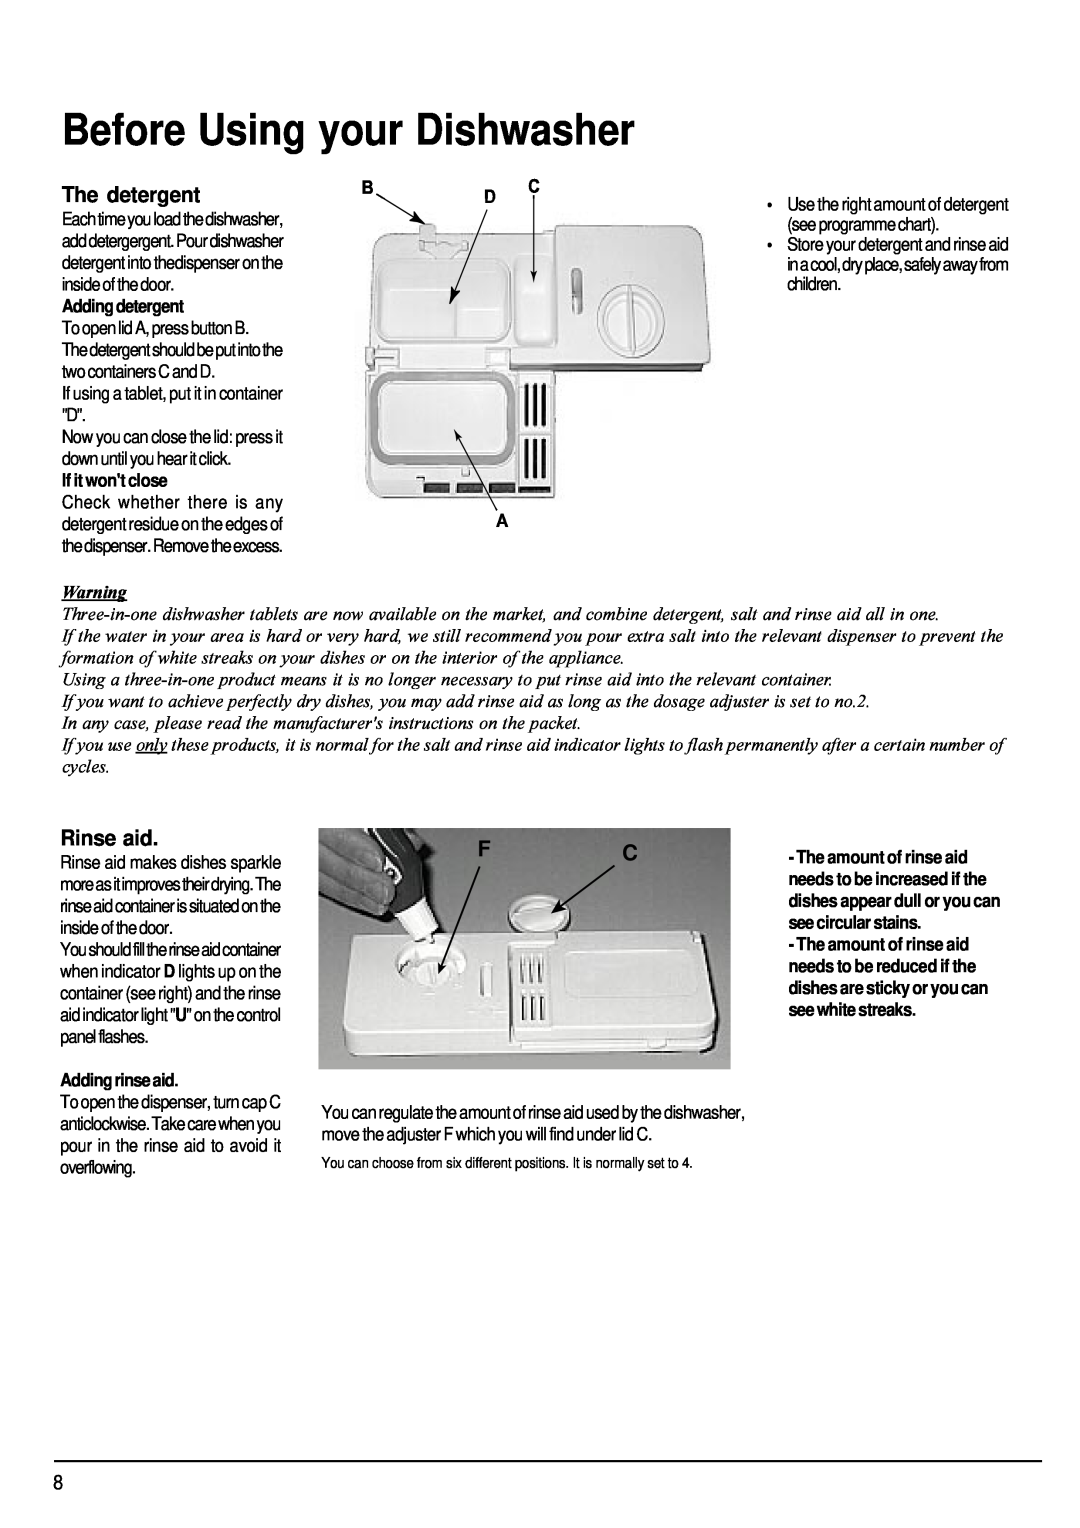 Hotpoint FDW85 manual Before Using your Dishwasher, The detergent, Rinse aid, Adding detergent, If it wont close 